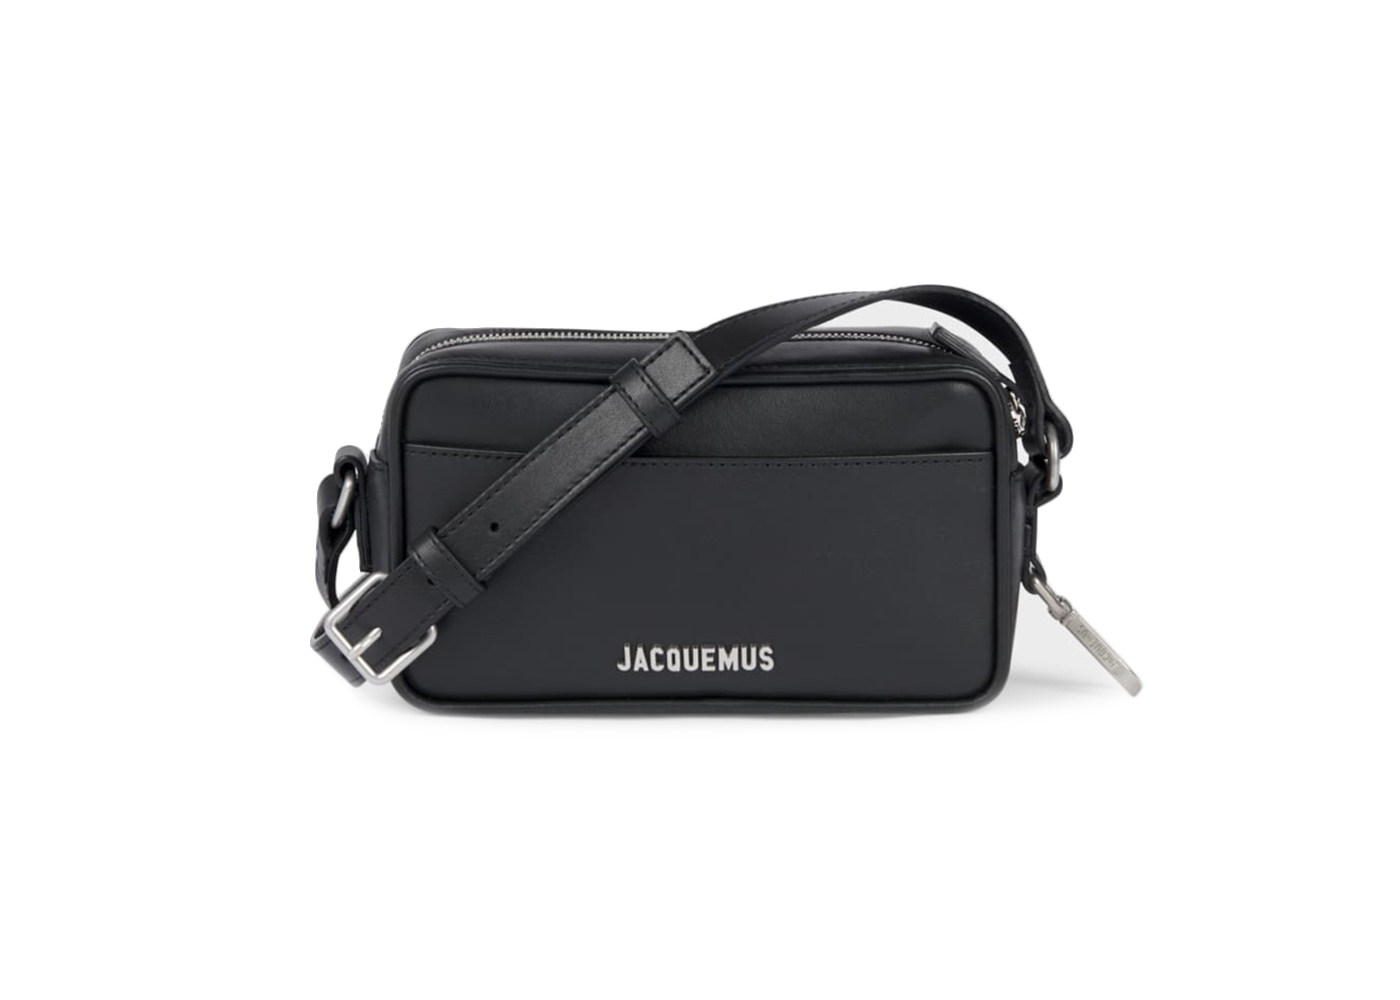 Buy Other Brands Jacquemus Accessories - StockX